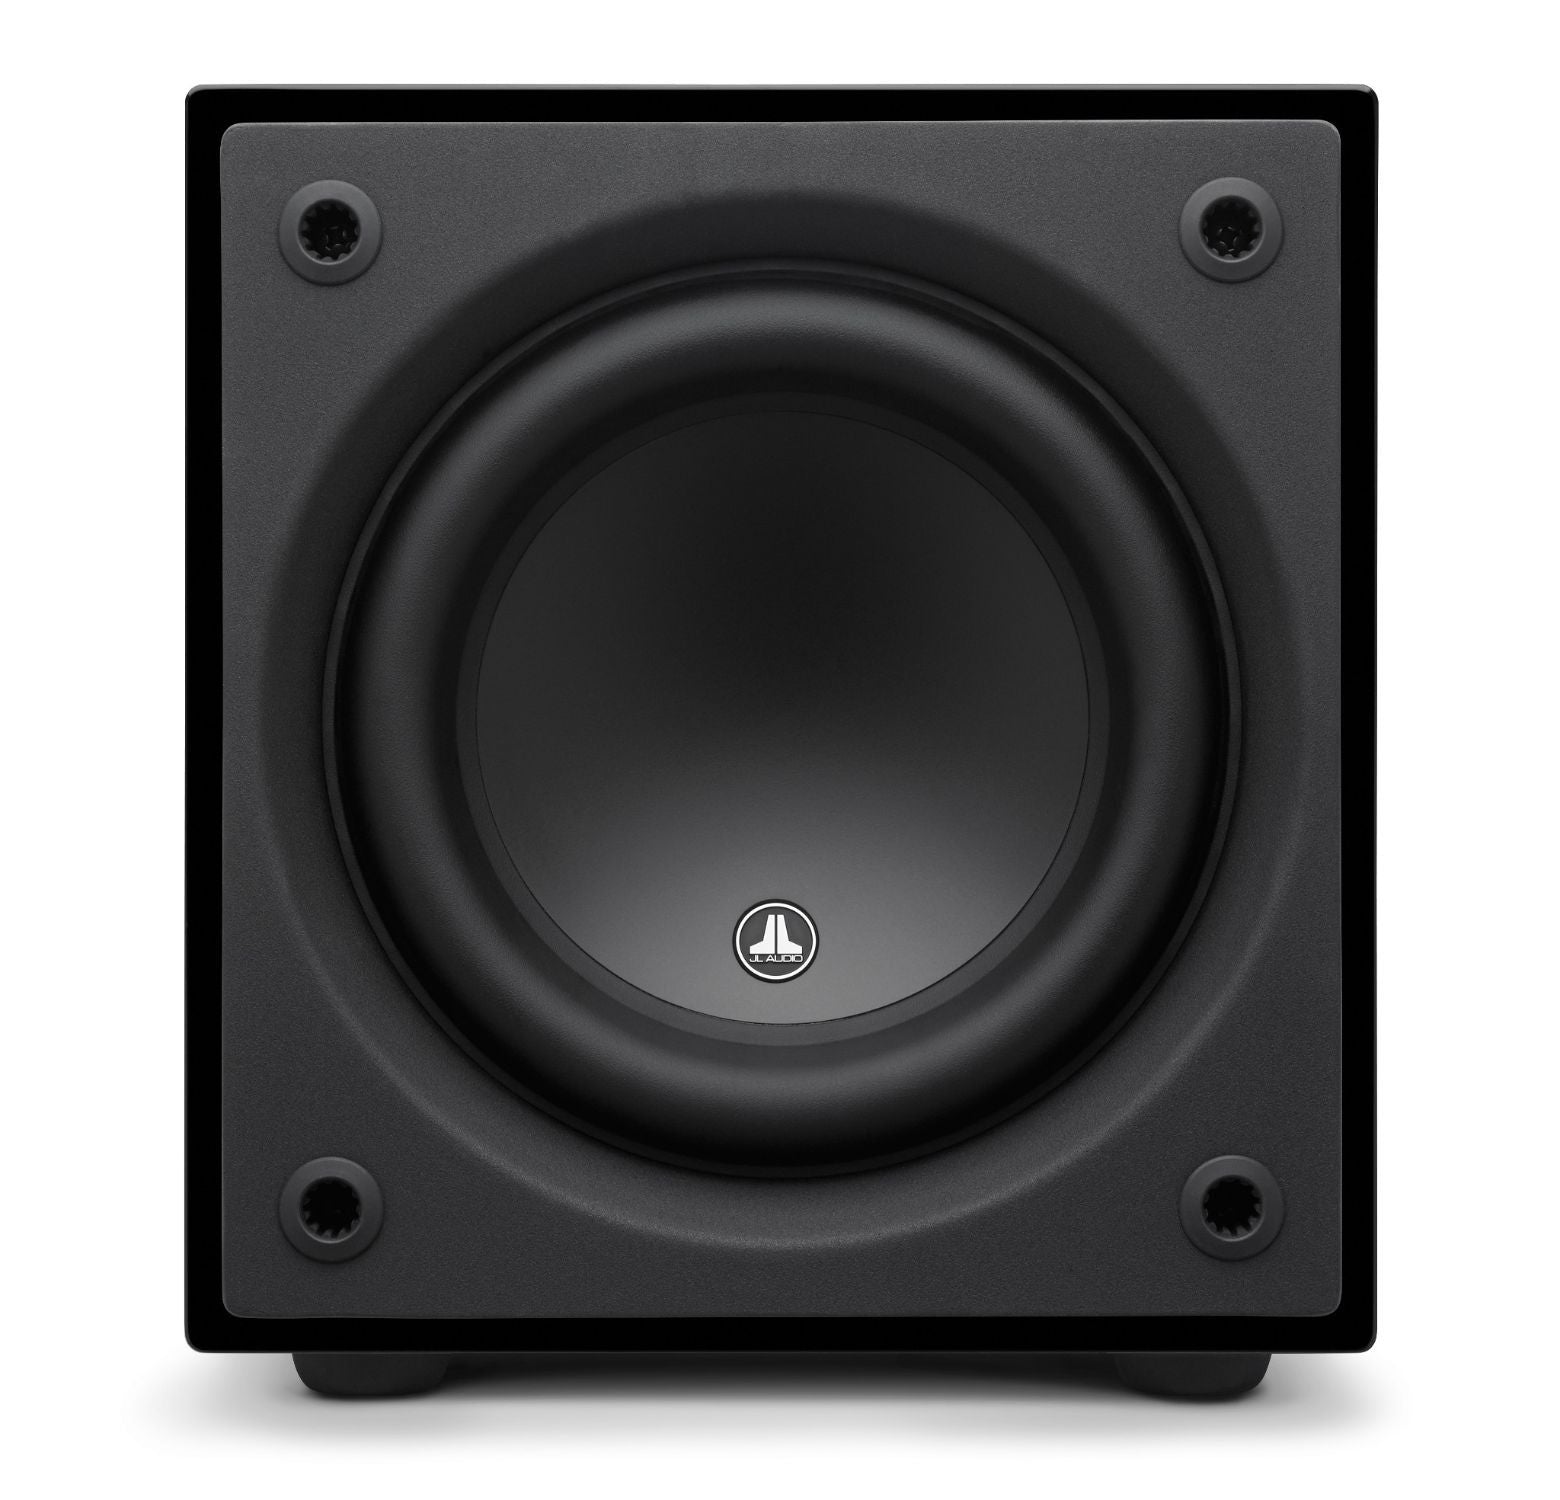 JL AUDIO Dominion® d110-GLOSS 10" (250 mm) POWERED SUBWOOFER